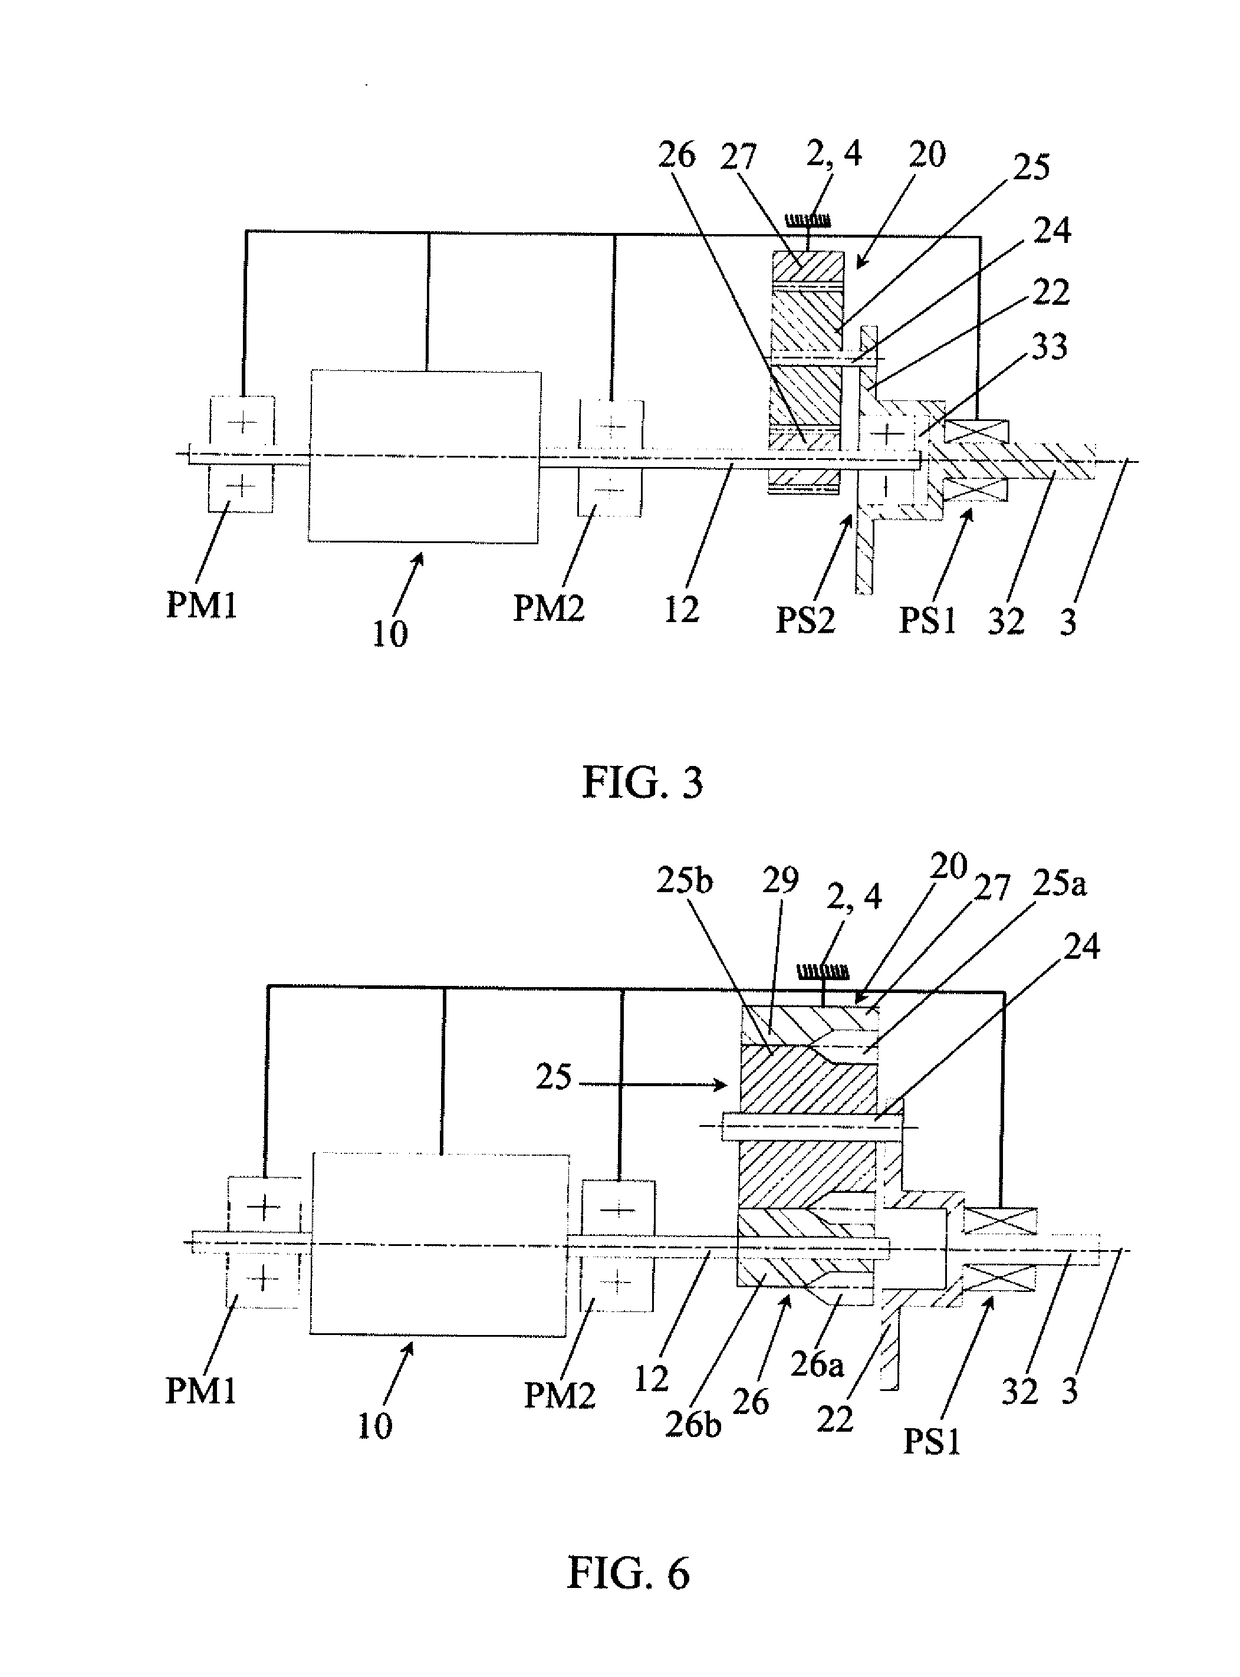 Portable power tool comprising an epicyclic reduction gear